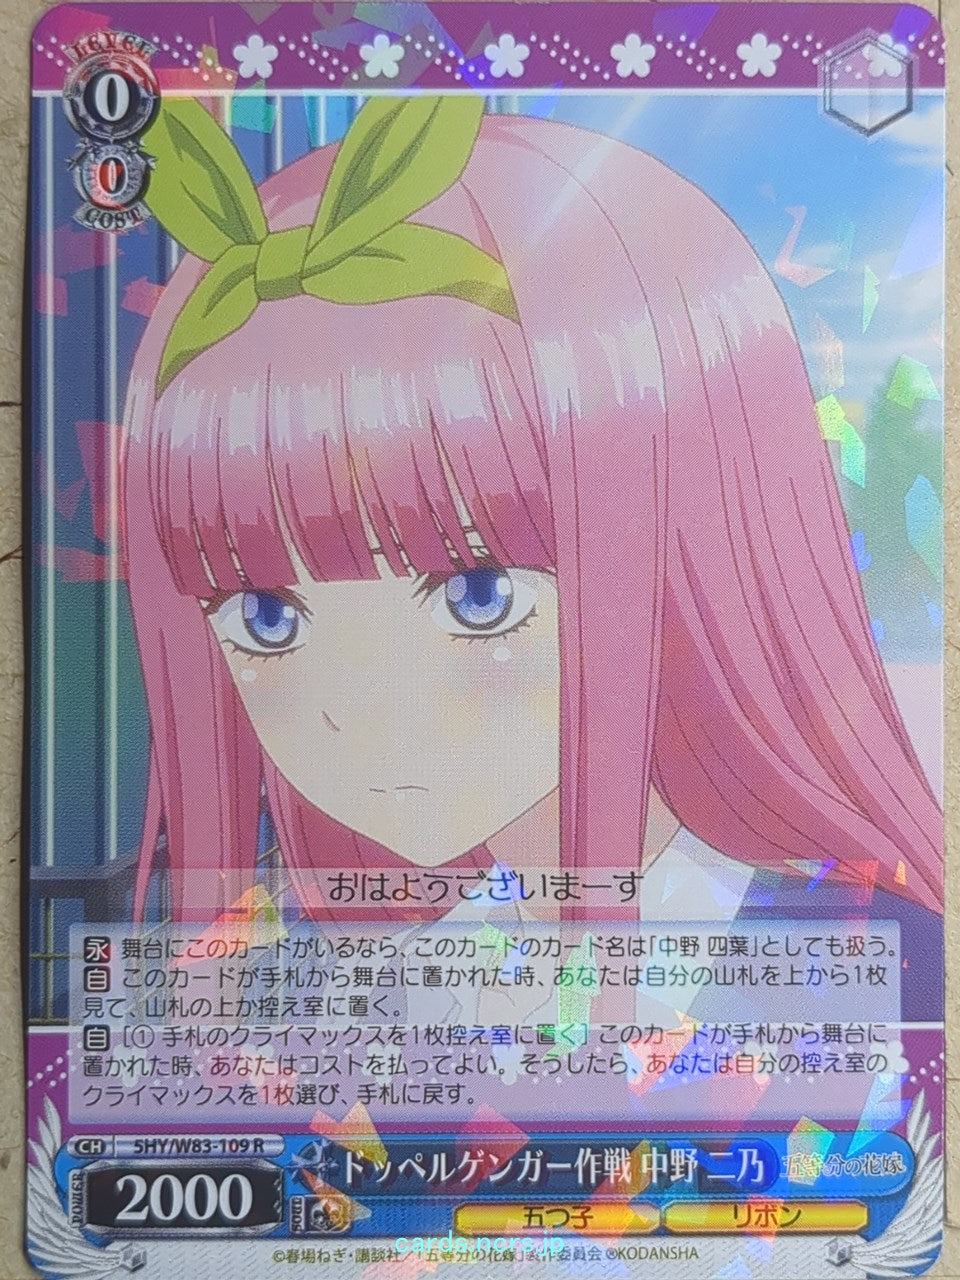 Weiss Schwarz The Quintessential Quintuplets -Nino Nakano-   Trading Card 5HY/W83-109R